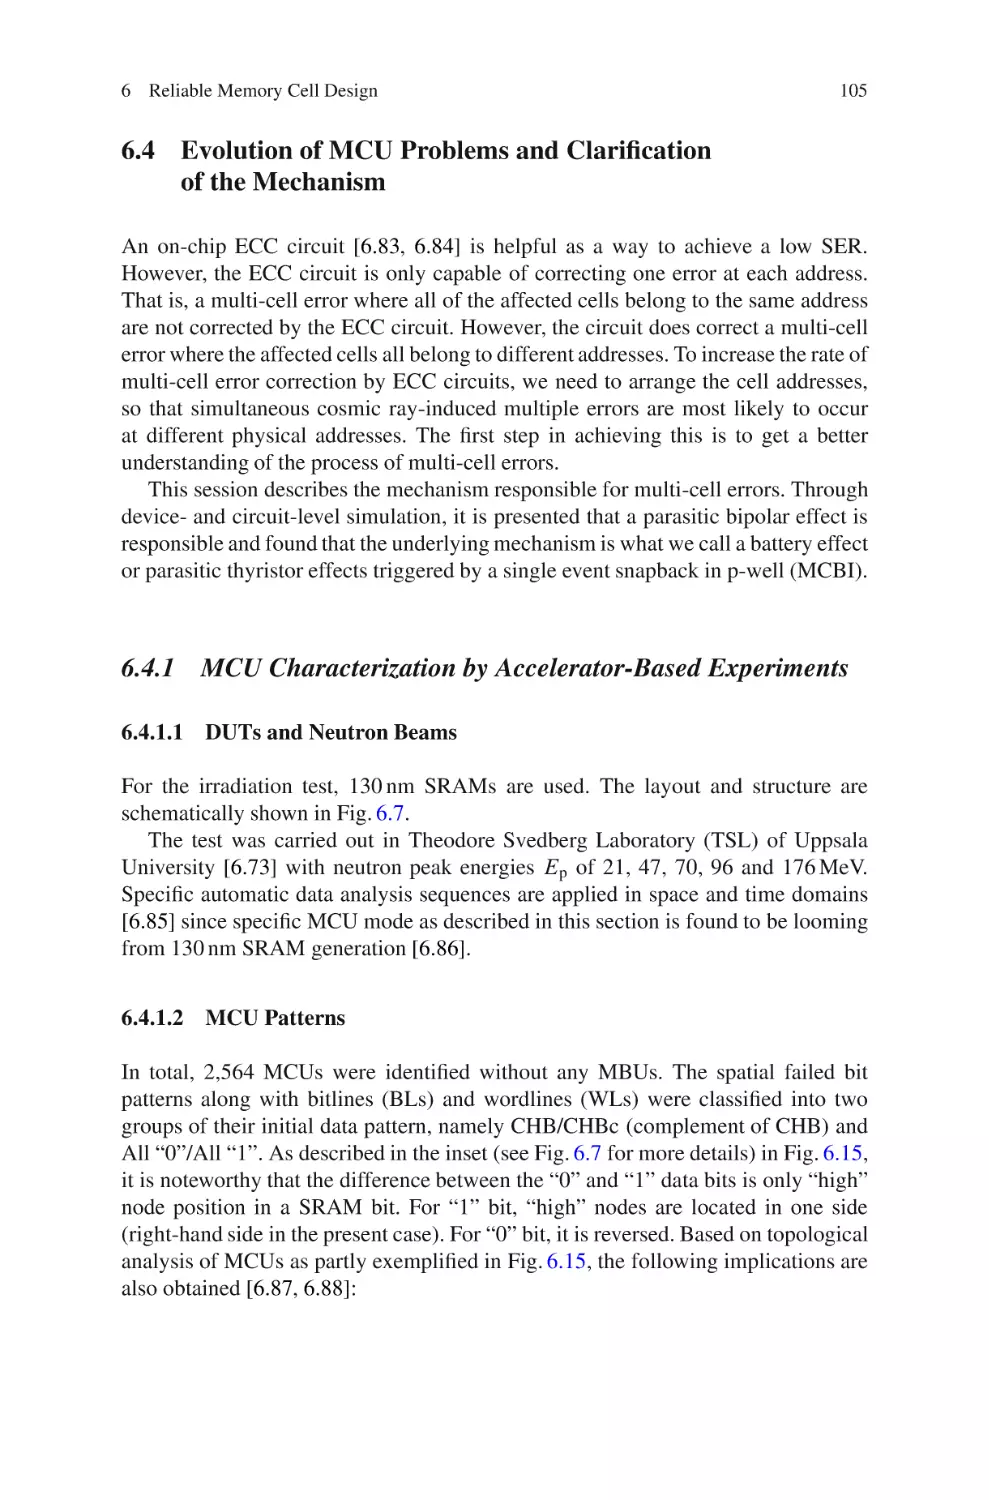 6.4 Evolution of MCU Problems and Clarification of the Mechanism
6.4.1 MCU Characterization by Accelerator-Based Experiments
6.4.1.1 DUTs and Neutron Beams
6.4.1.2 MCU Patterns